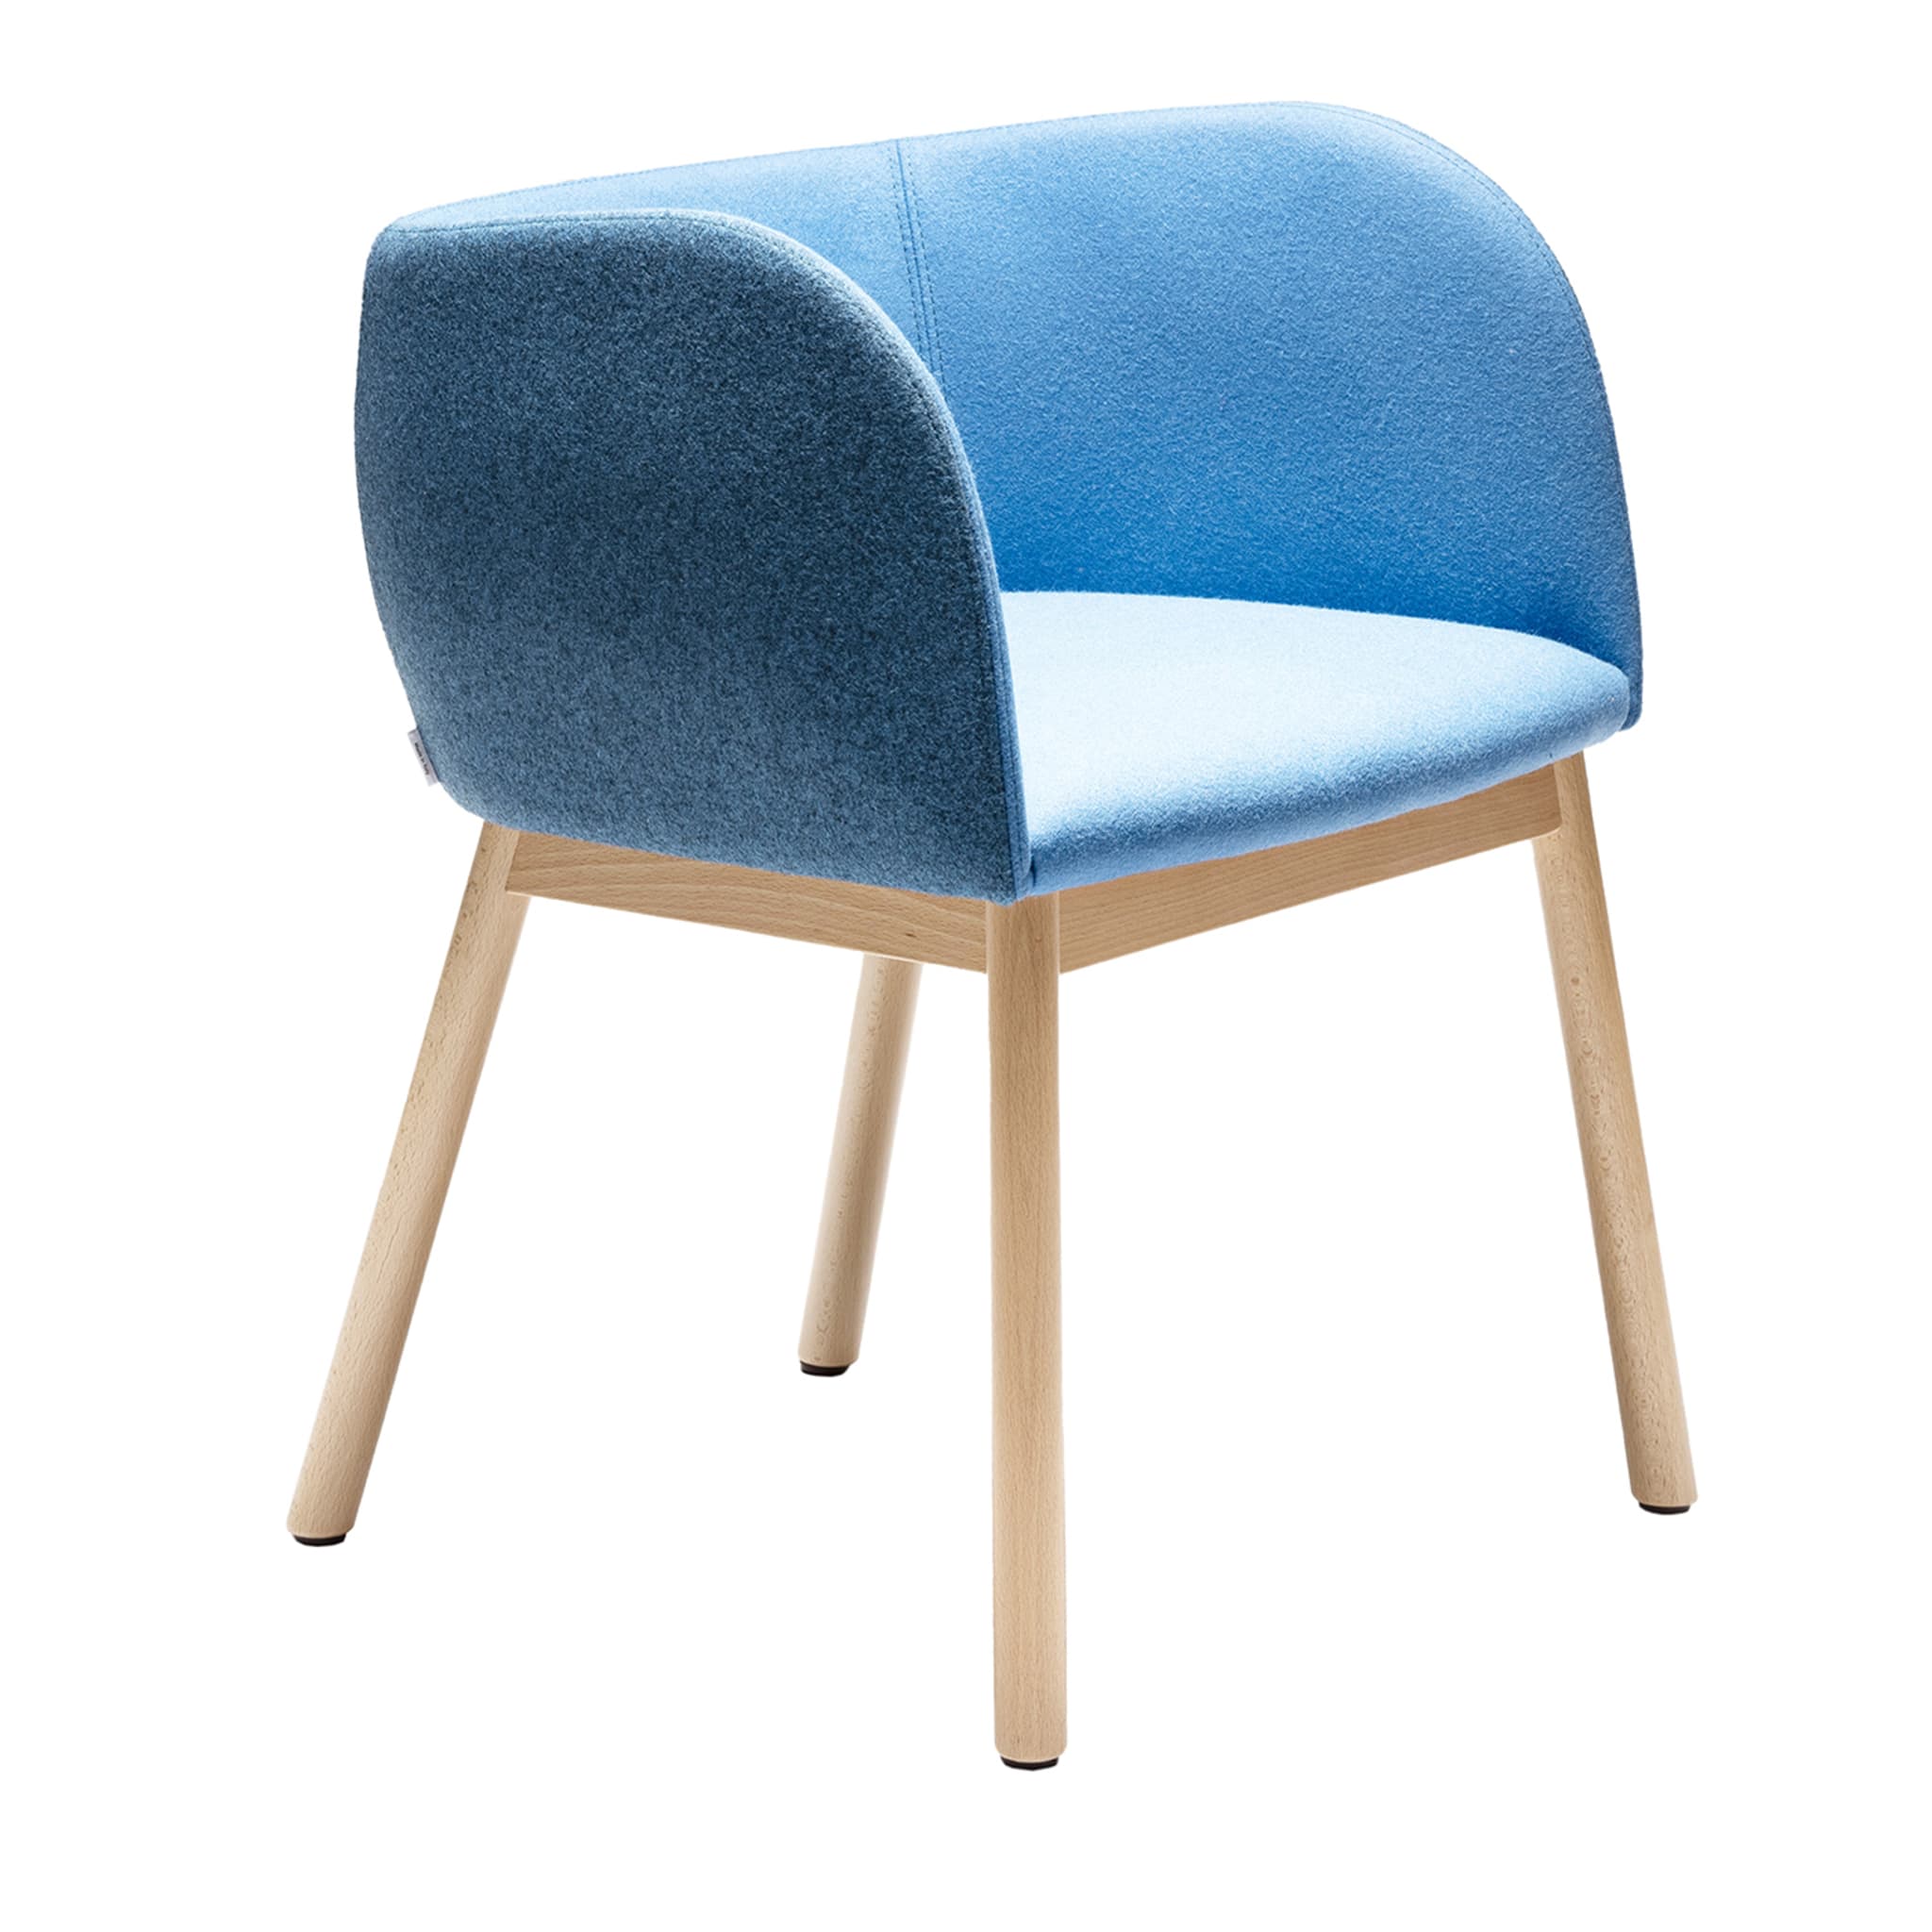 Mousse SP Blue Chair by Tommaso Caldera - Main view